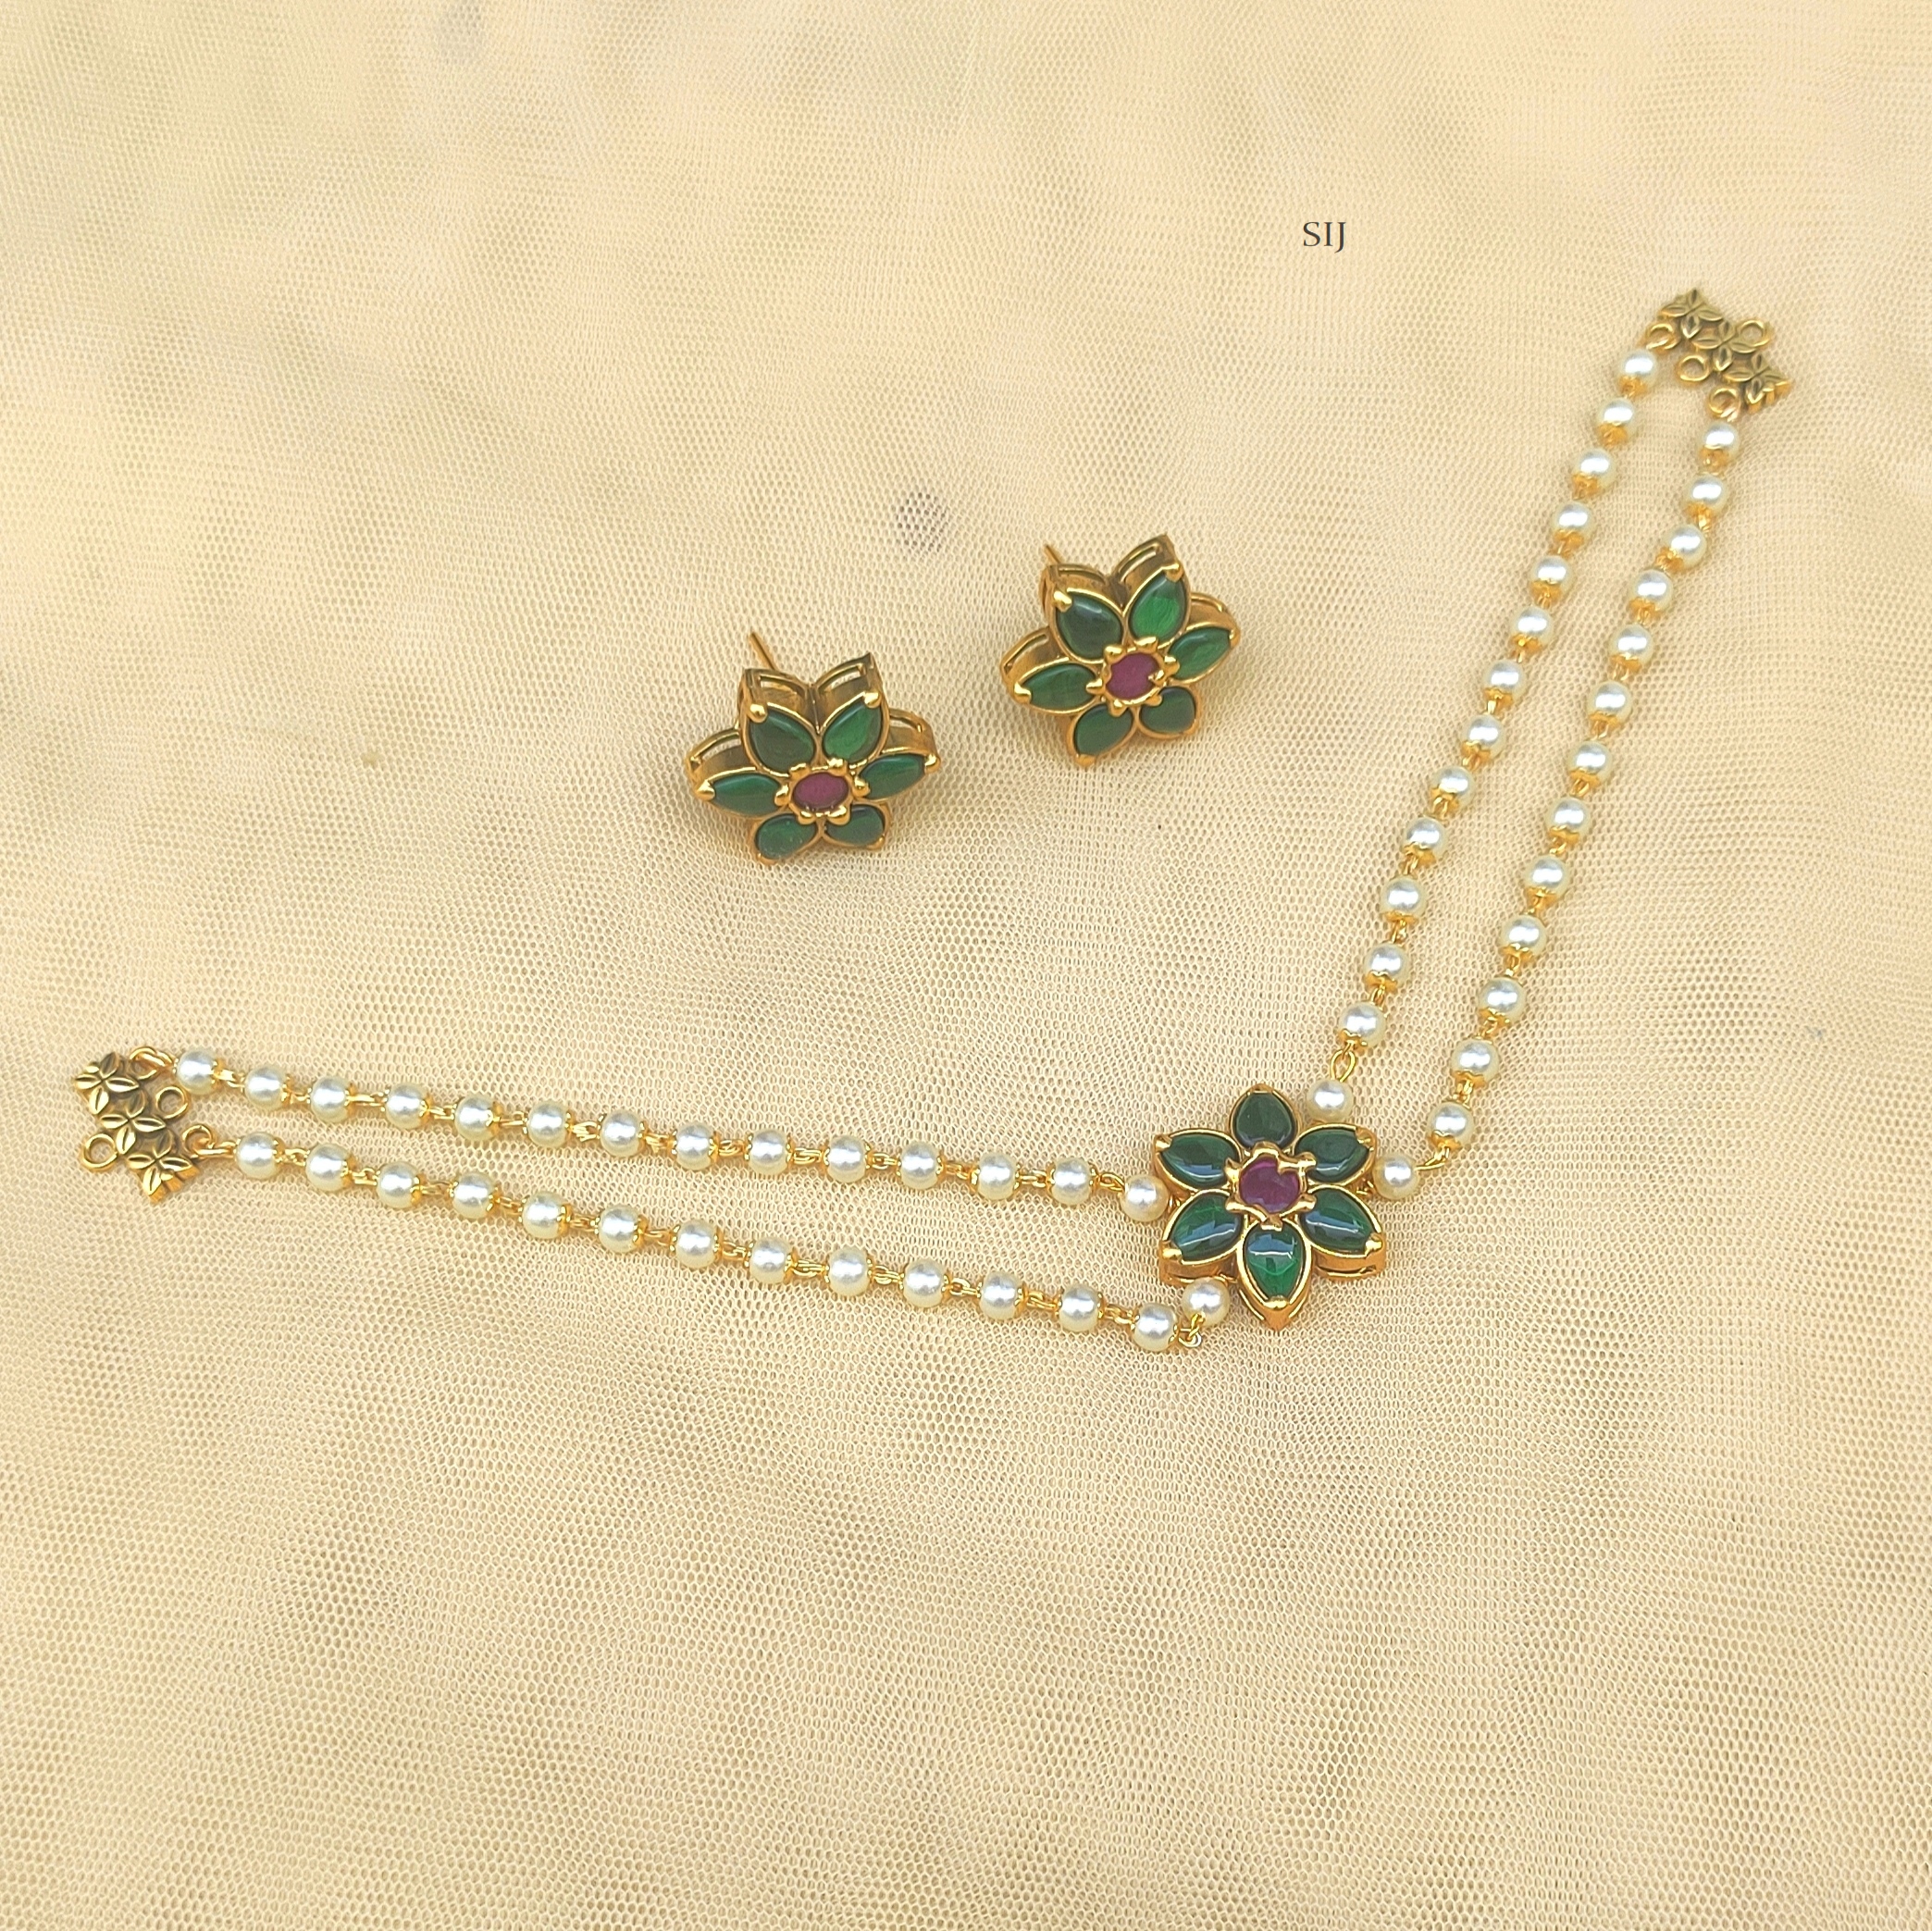 Pearl Choker with Green and Red Stones Flower Design Pendant